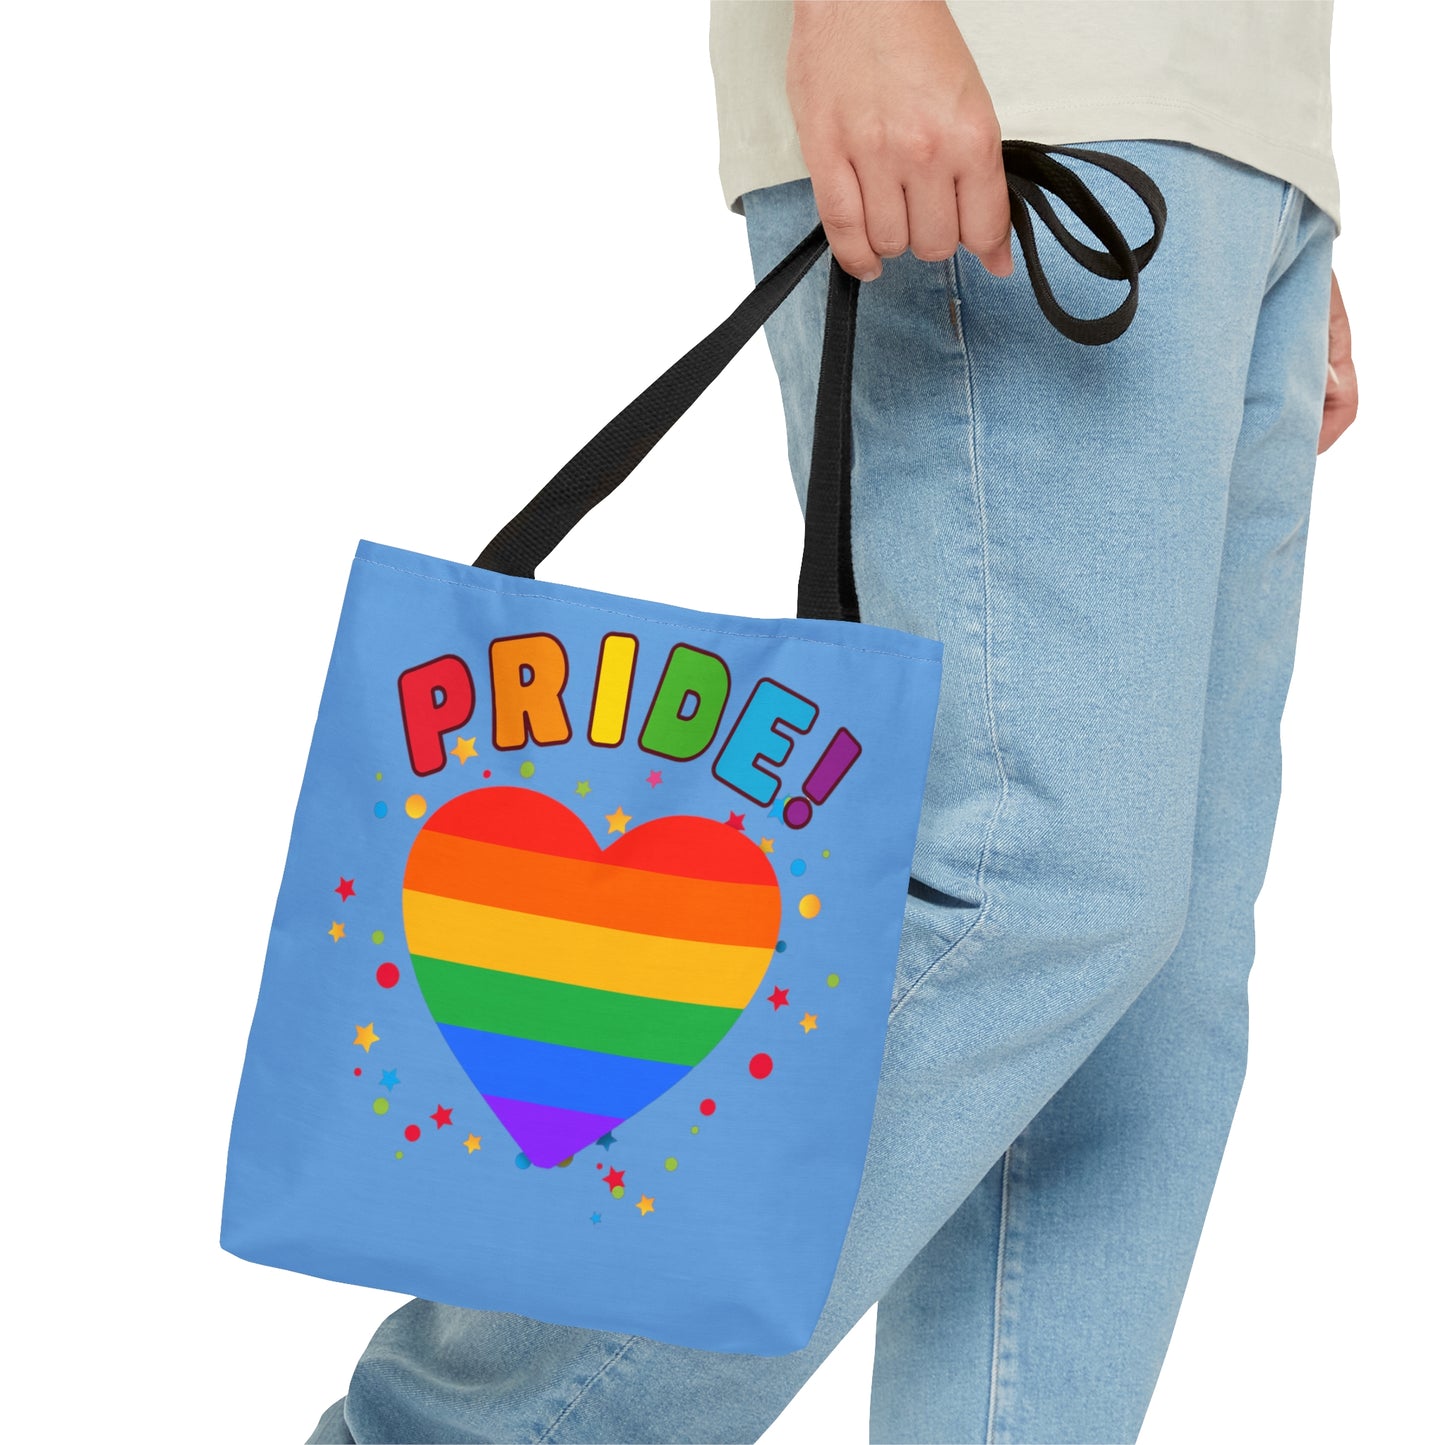 Celebrate PRIDE with this colorful Tote Bag in 3 sizes to meet your needs.